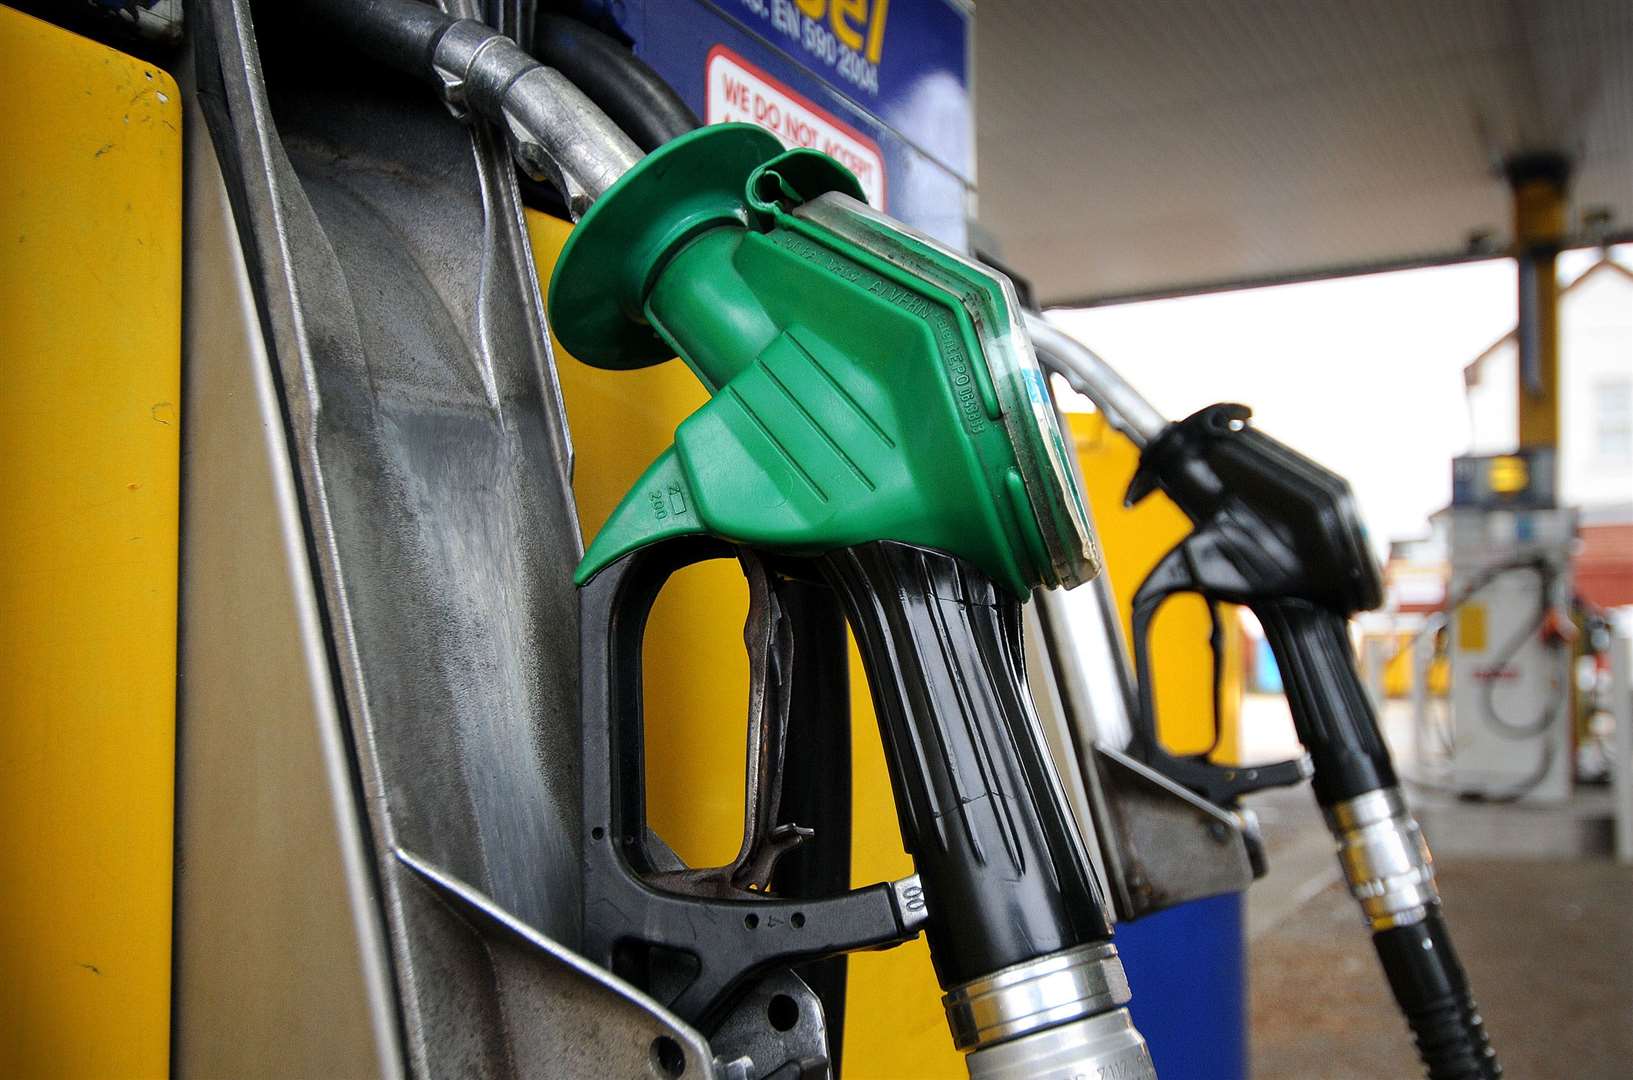 Fuel prices in Kent can vary by 14p a litre